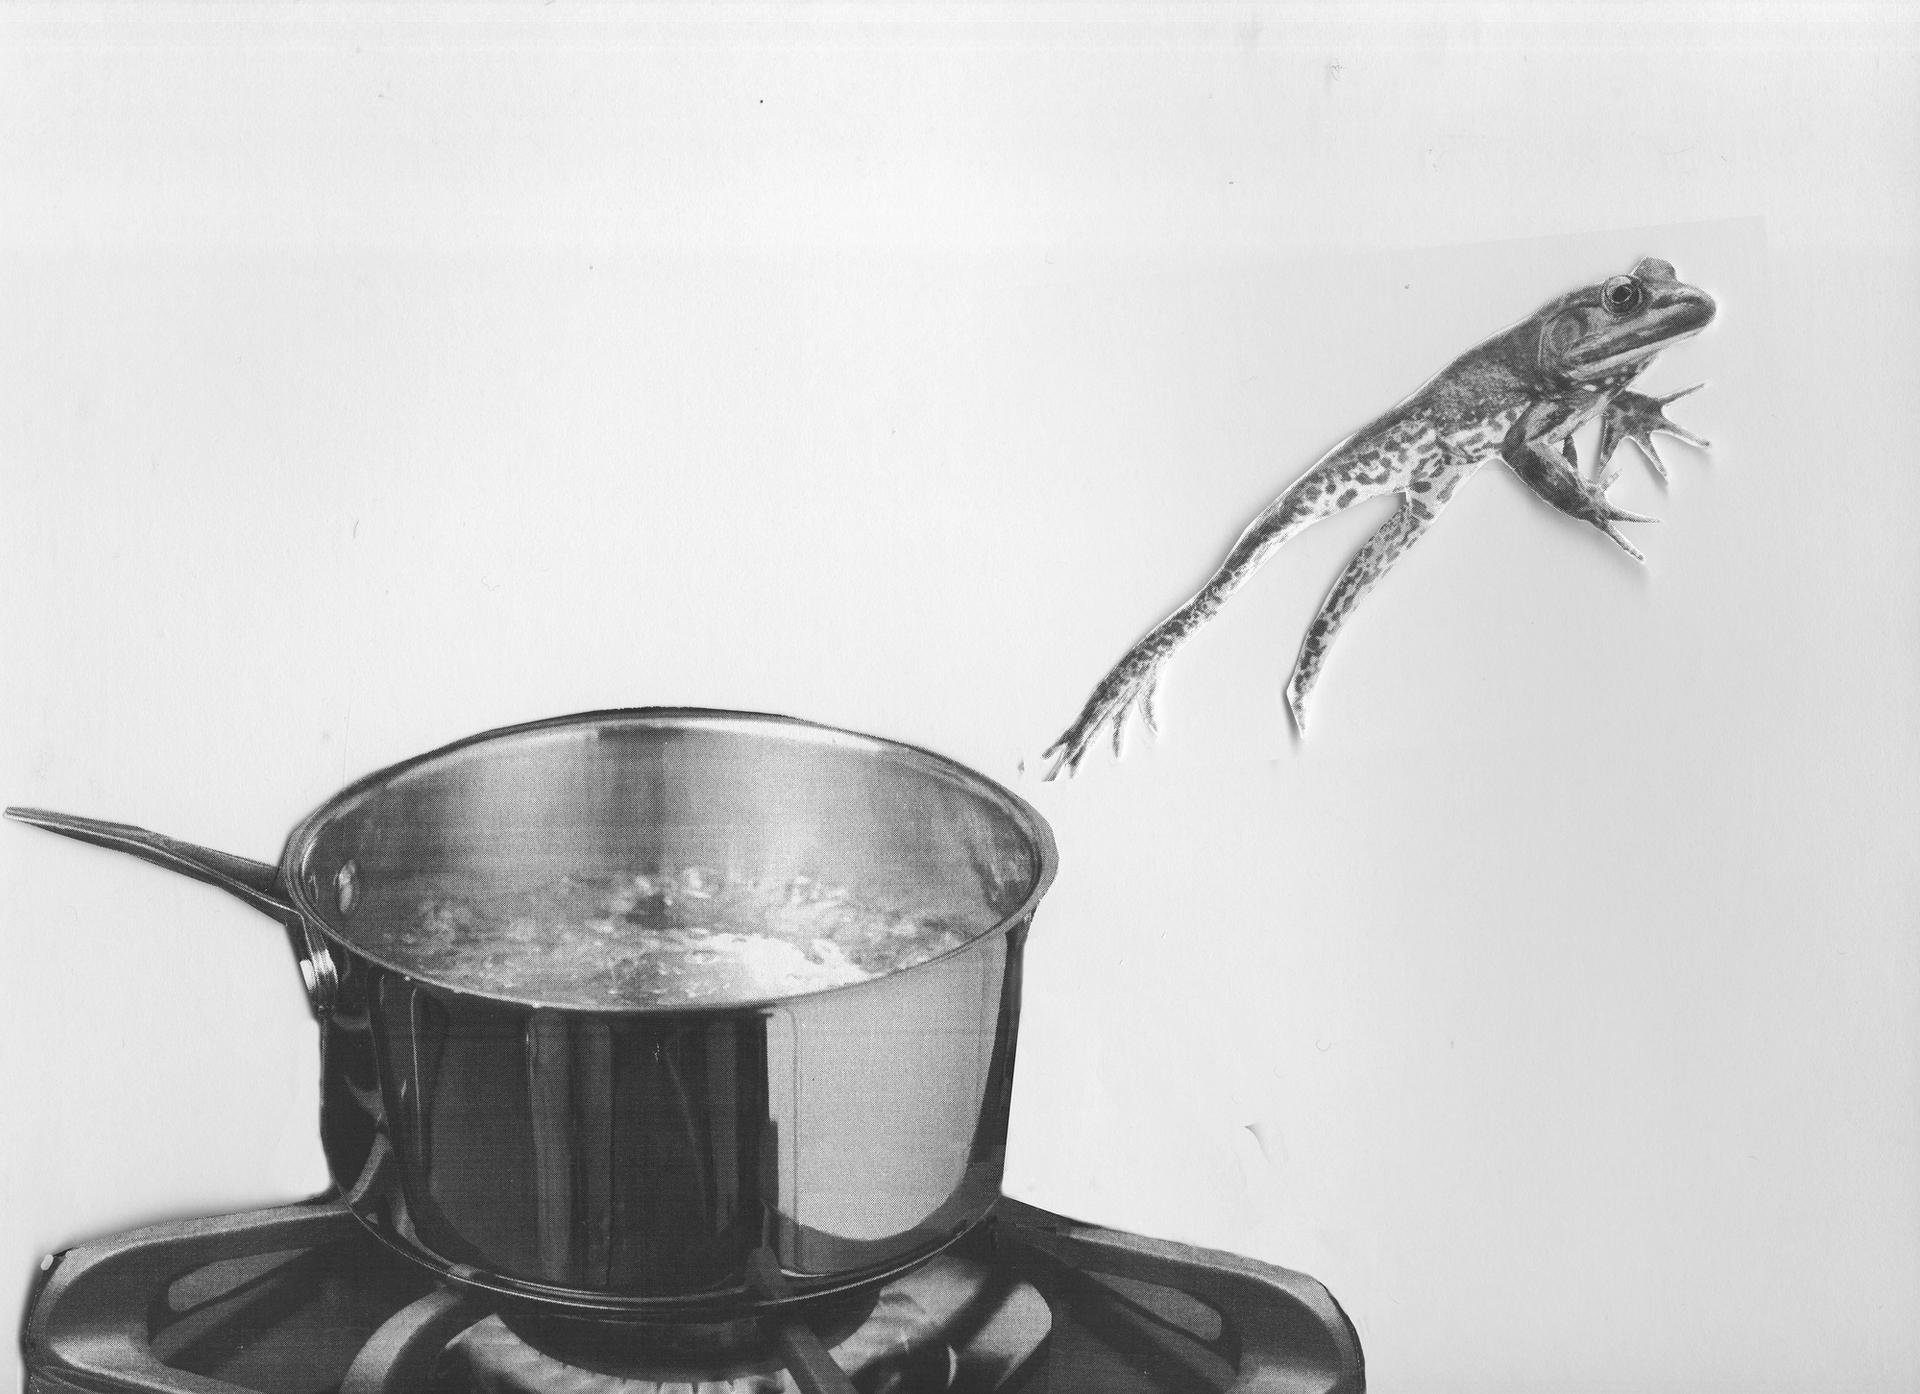 “The frogs have managed to jump out of the boiling pot just in time,” the artist Martha Rosler told The Art Newspaper Photo: Martha Rosler